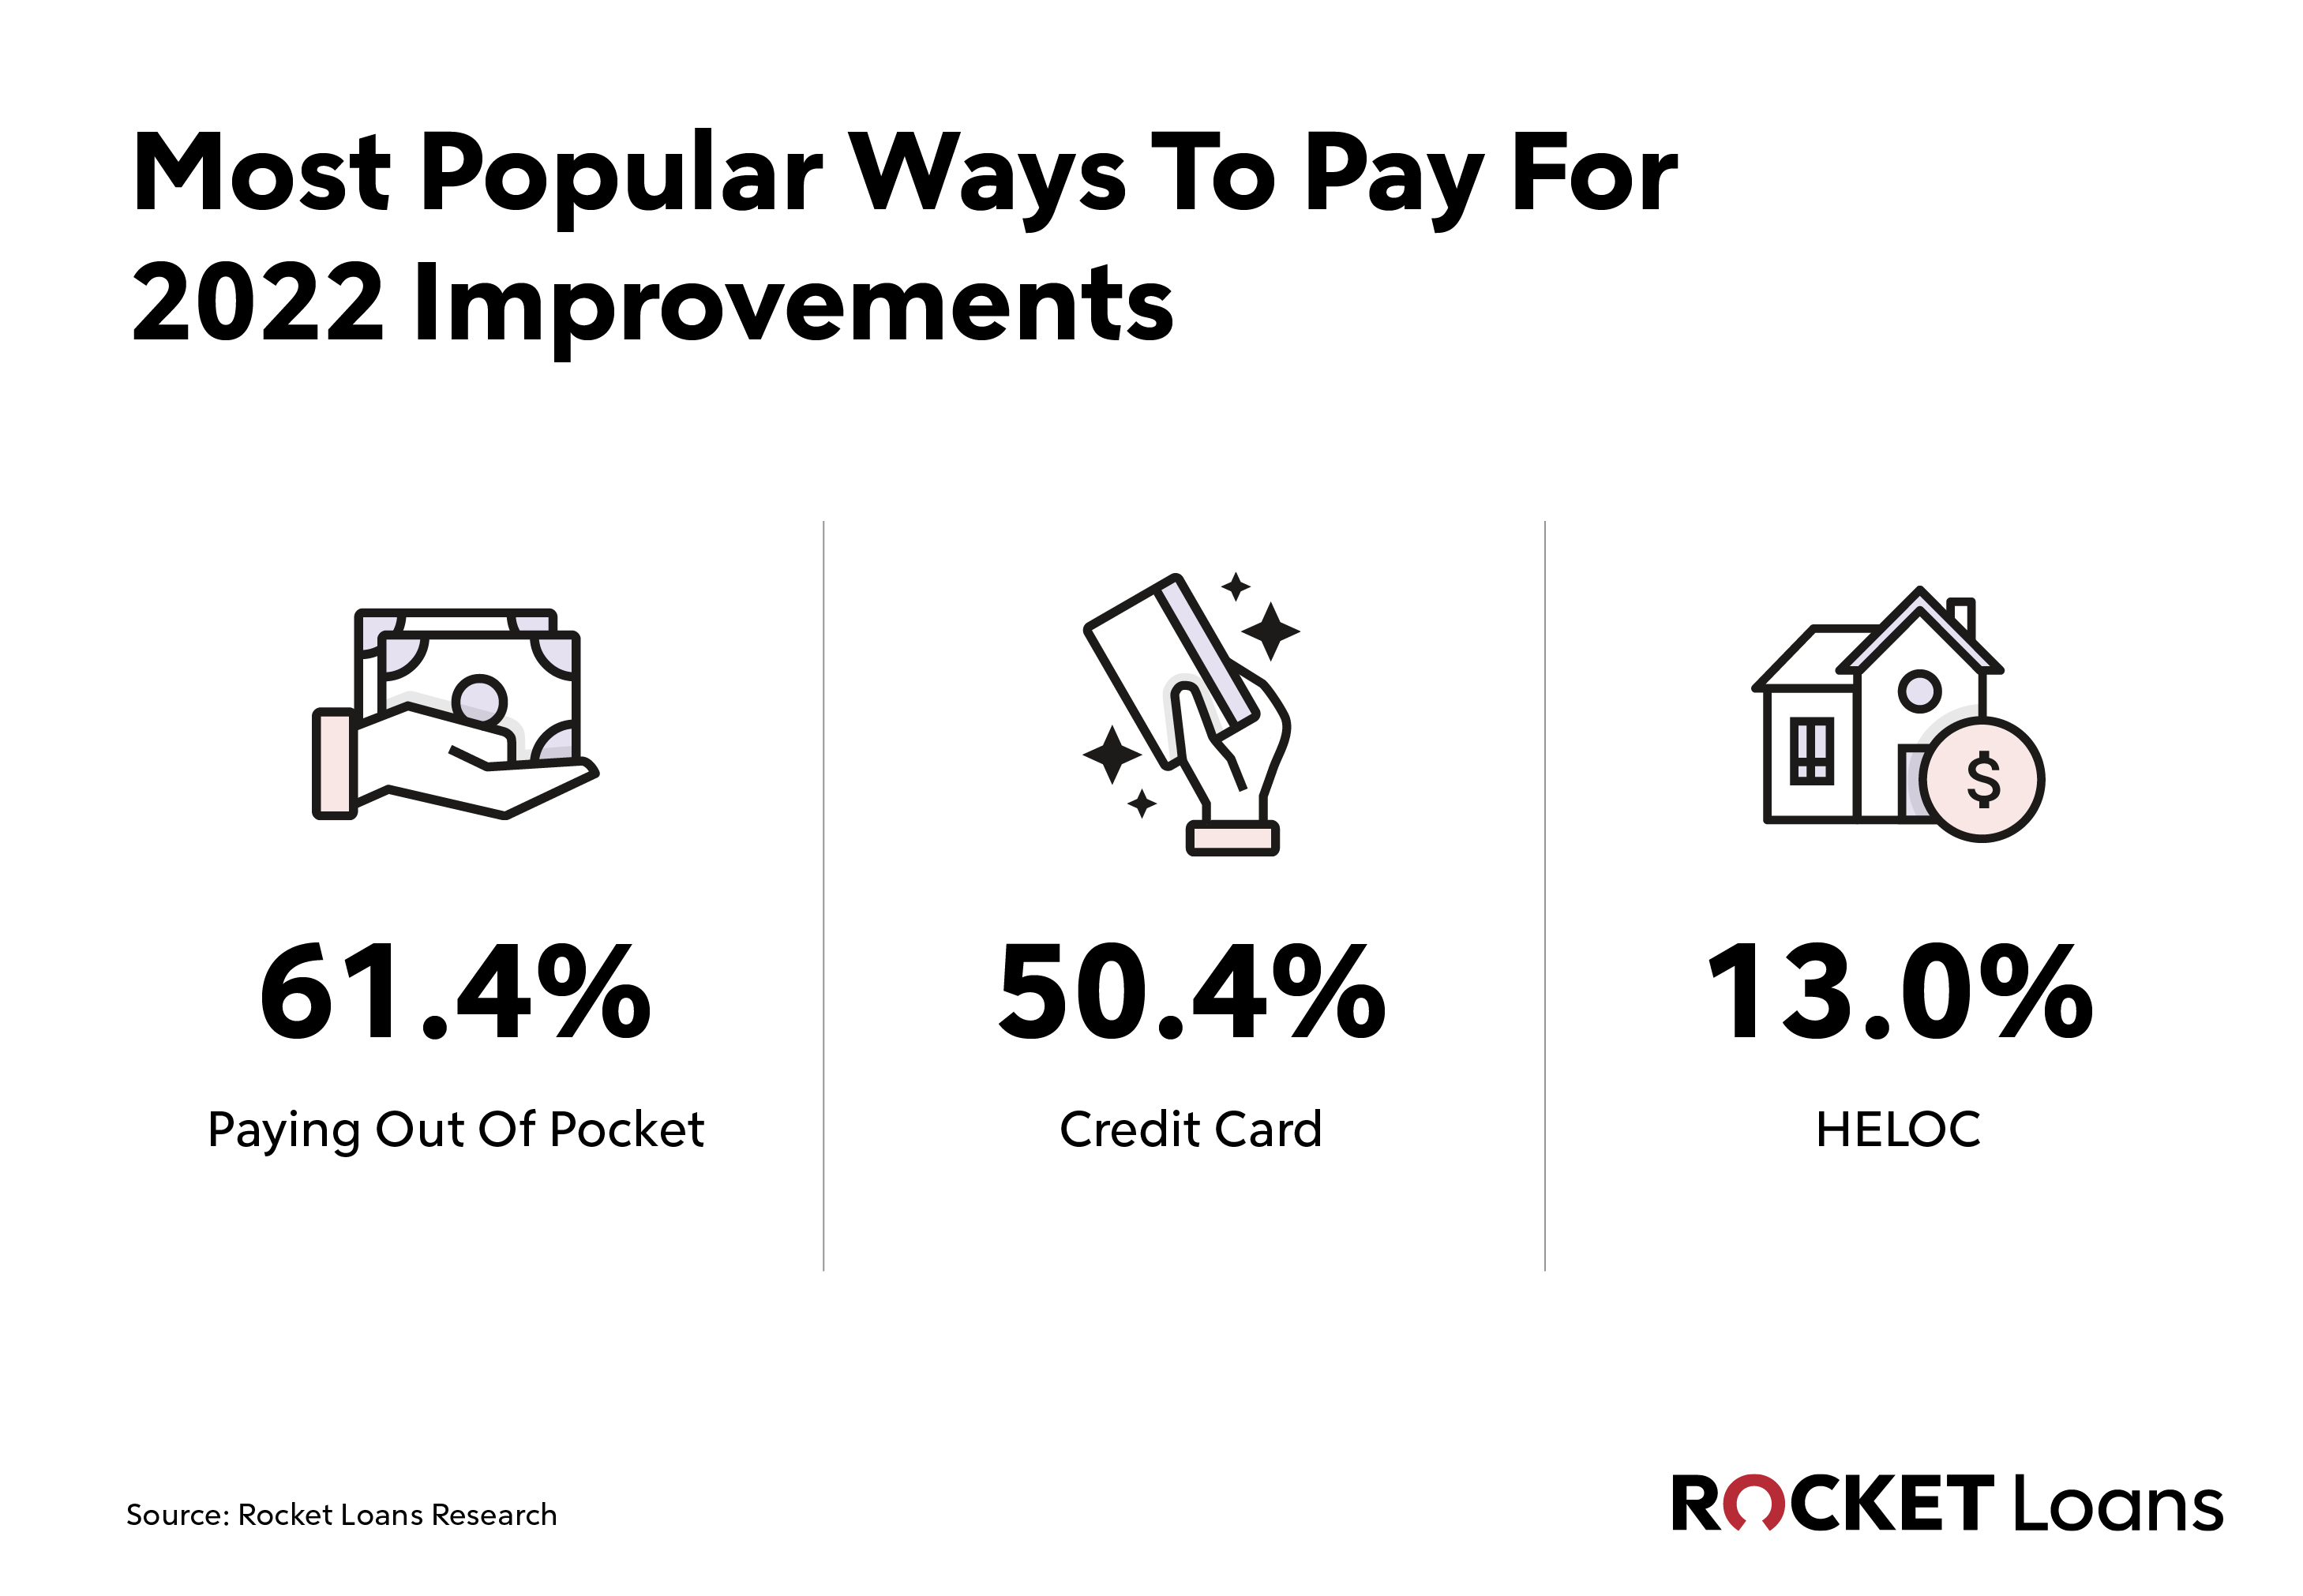 Infographic showing Most Popular Ways to pay for 2022 Improvements